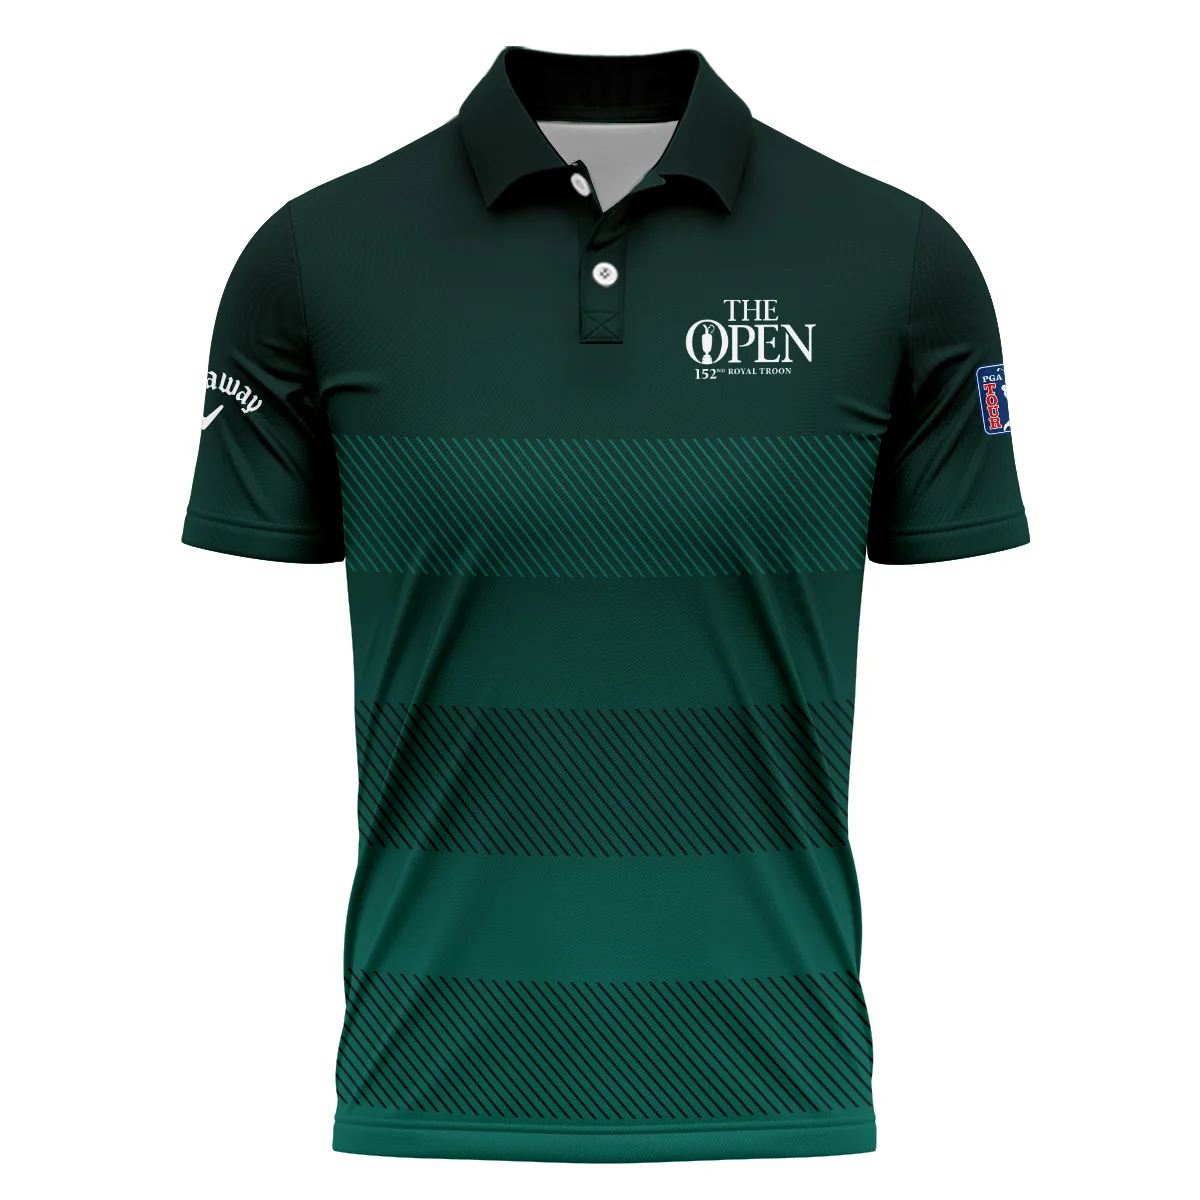 152nd Open Championship Callaway Dark Green Gradient Line Pattern Performance T-Shirt All Over Prints HOTOP280624A01CLWTS